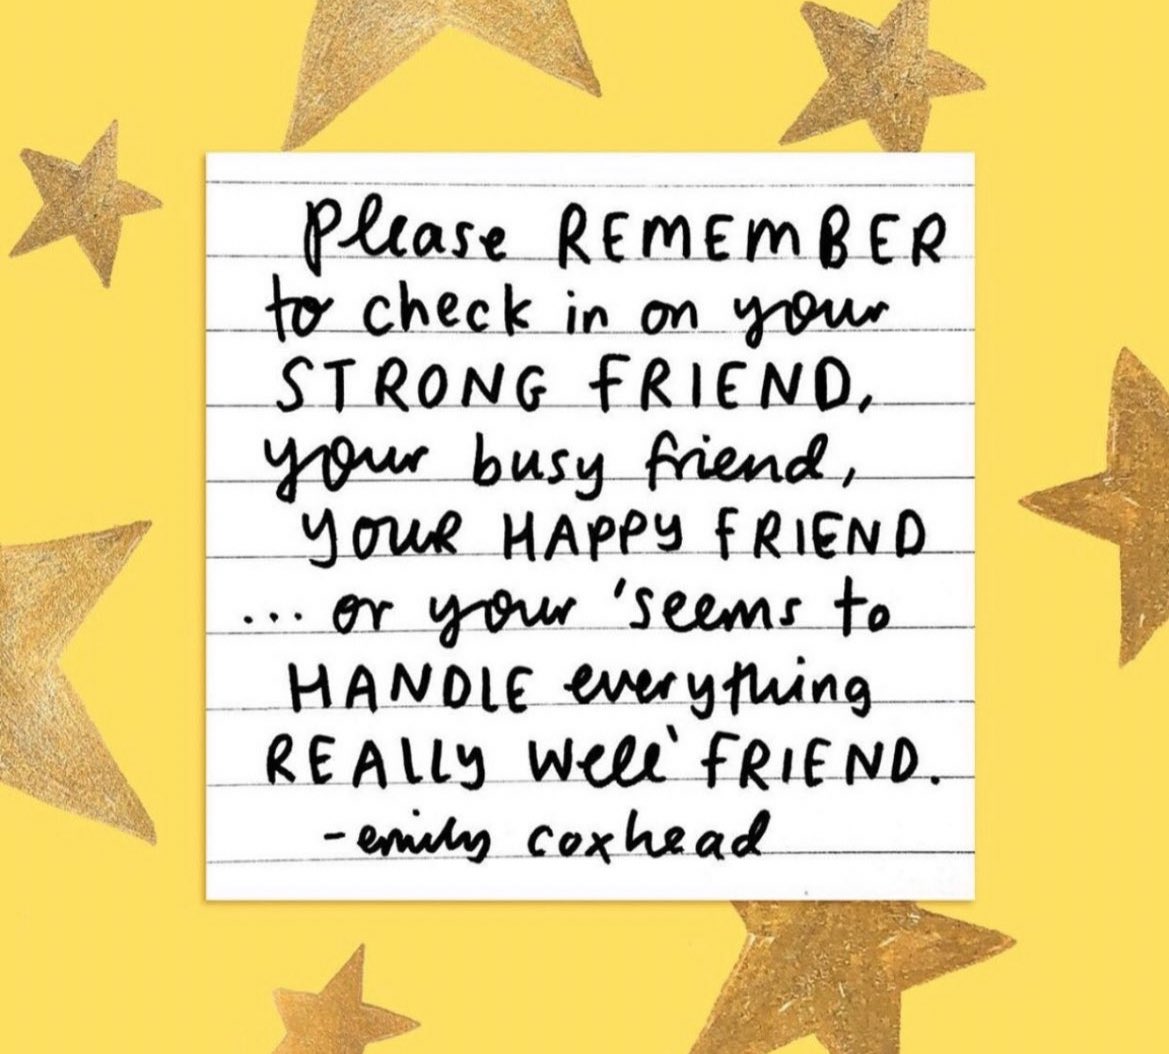 Please remember to check in on your strong friend, your busy friend, your happy friend… your “seems to handle everything well” friend. ❤️ @emilycoxhead